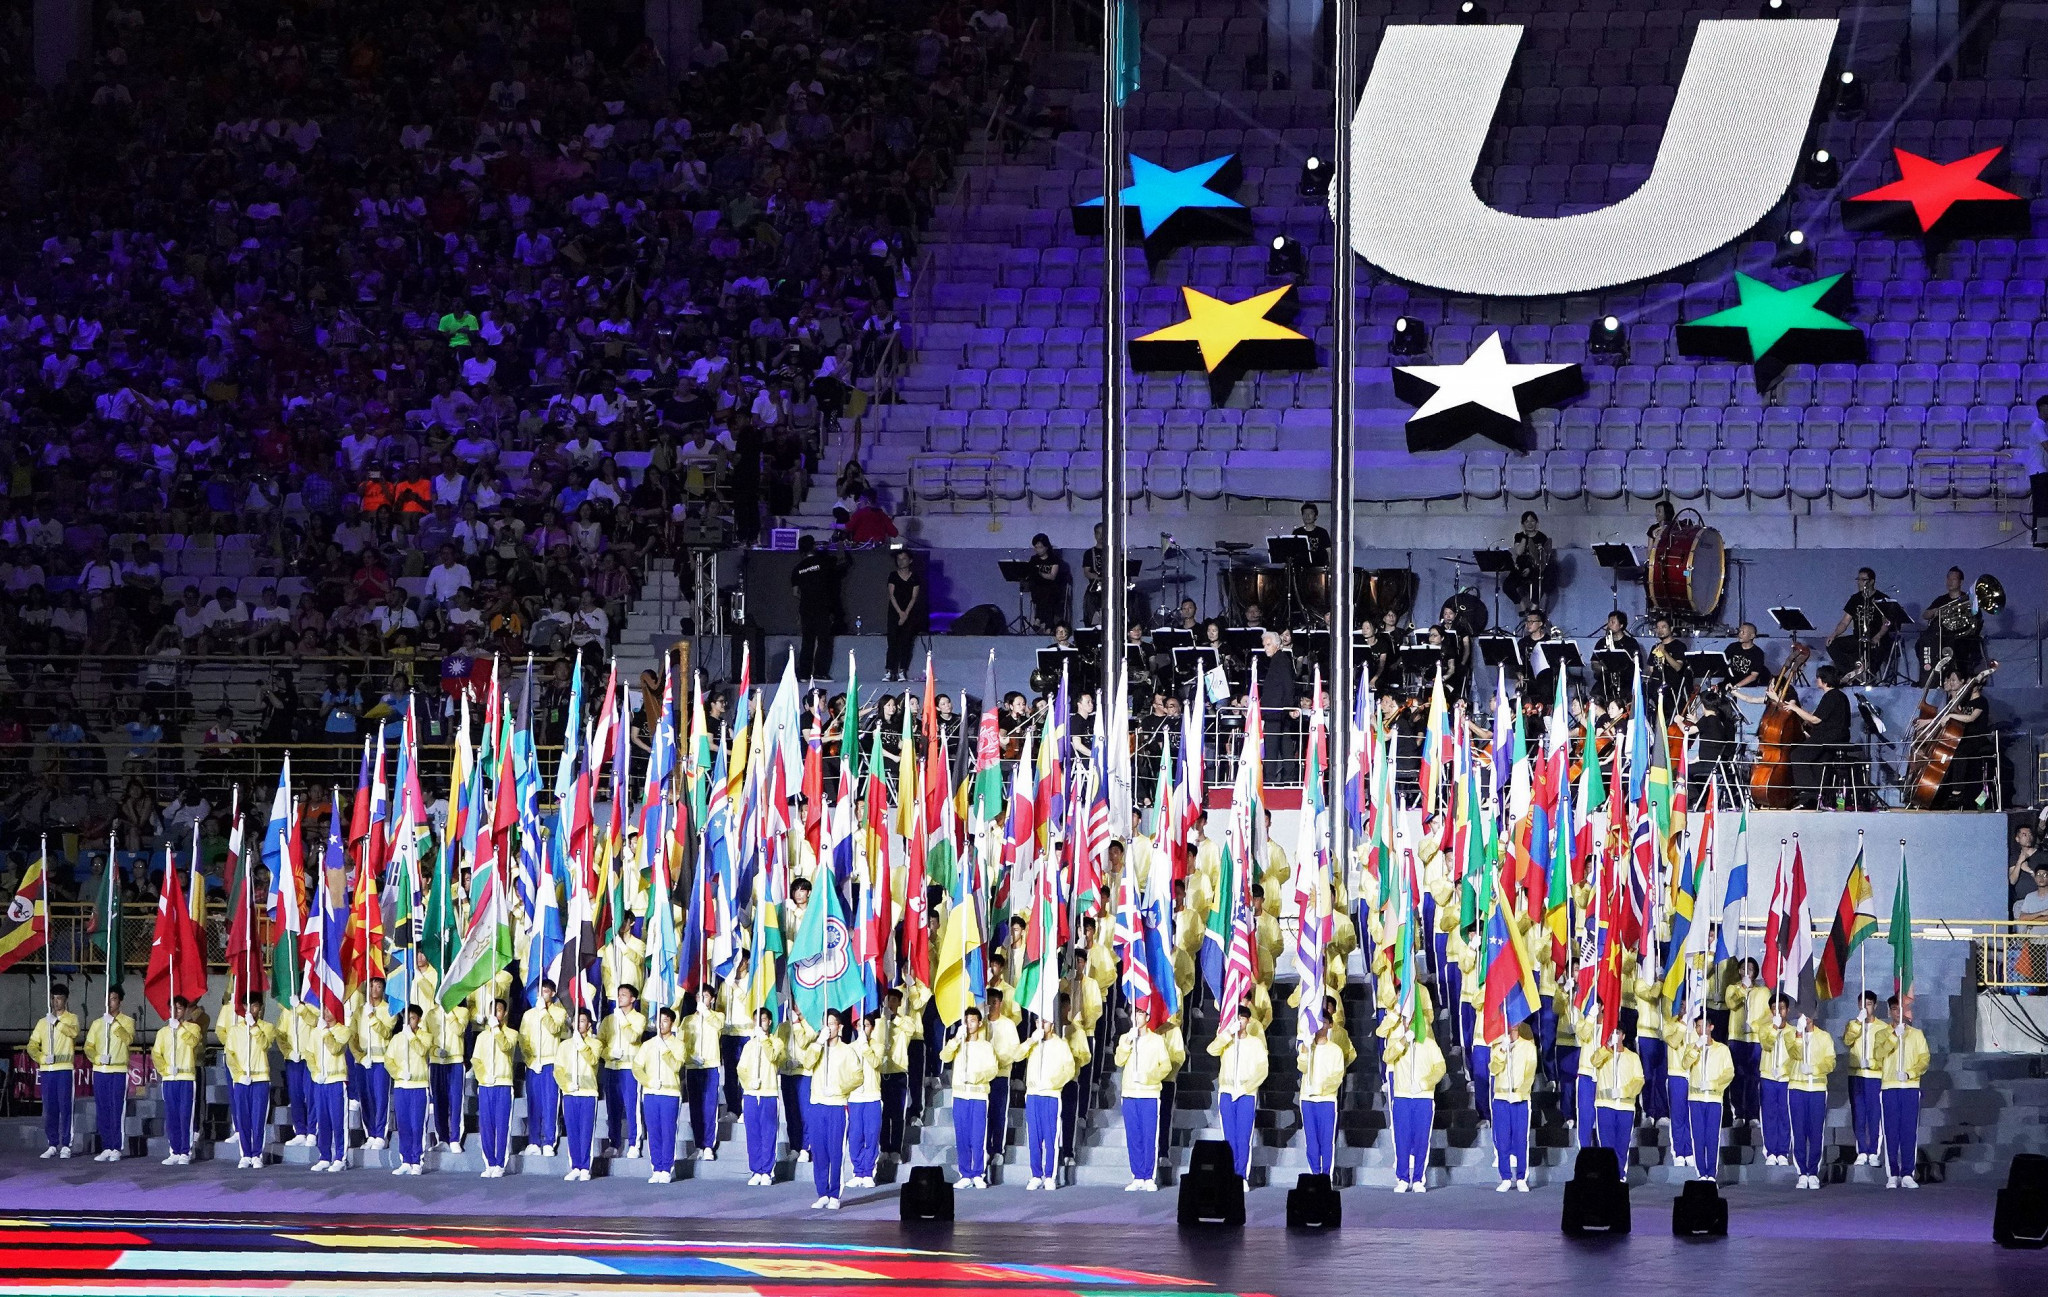 The Universiade is considered the pinnacle of tertiary sporting competition. The latest summer edition took place in Taipei last year ©Getty Images